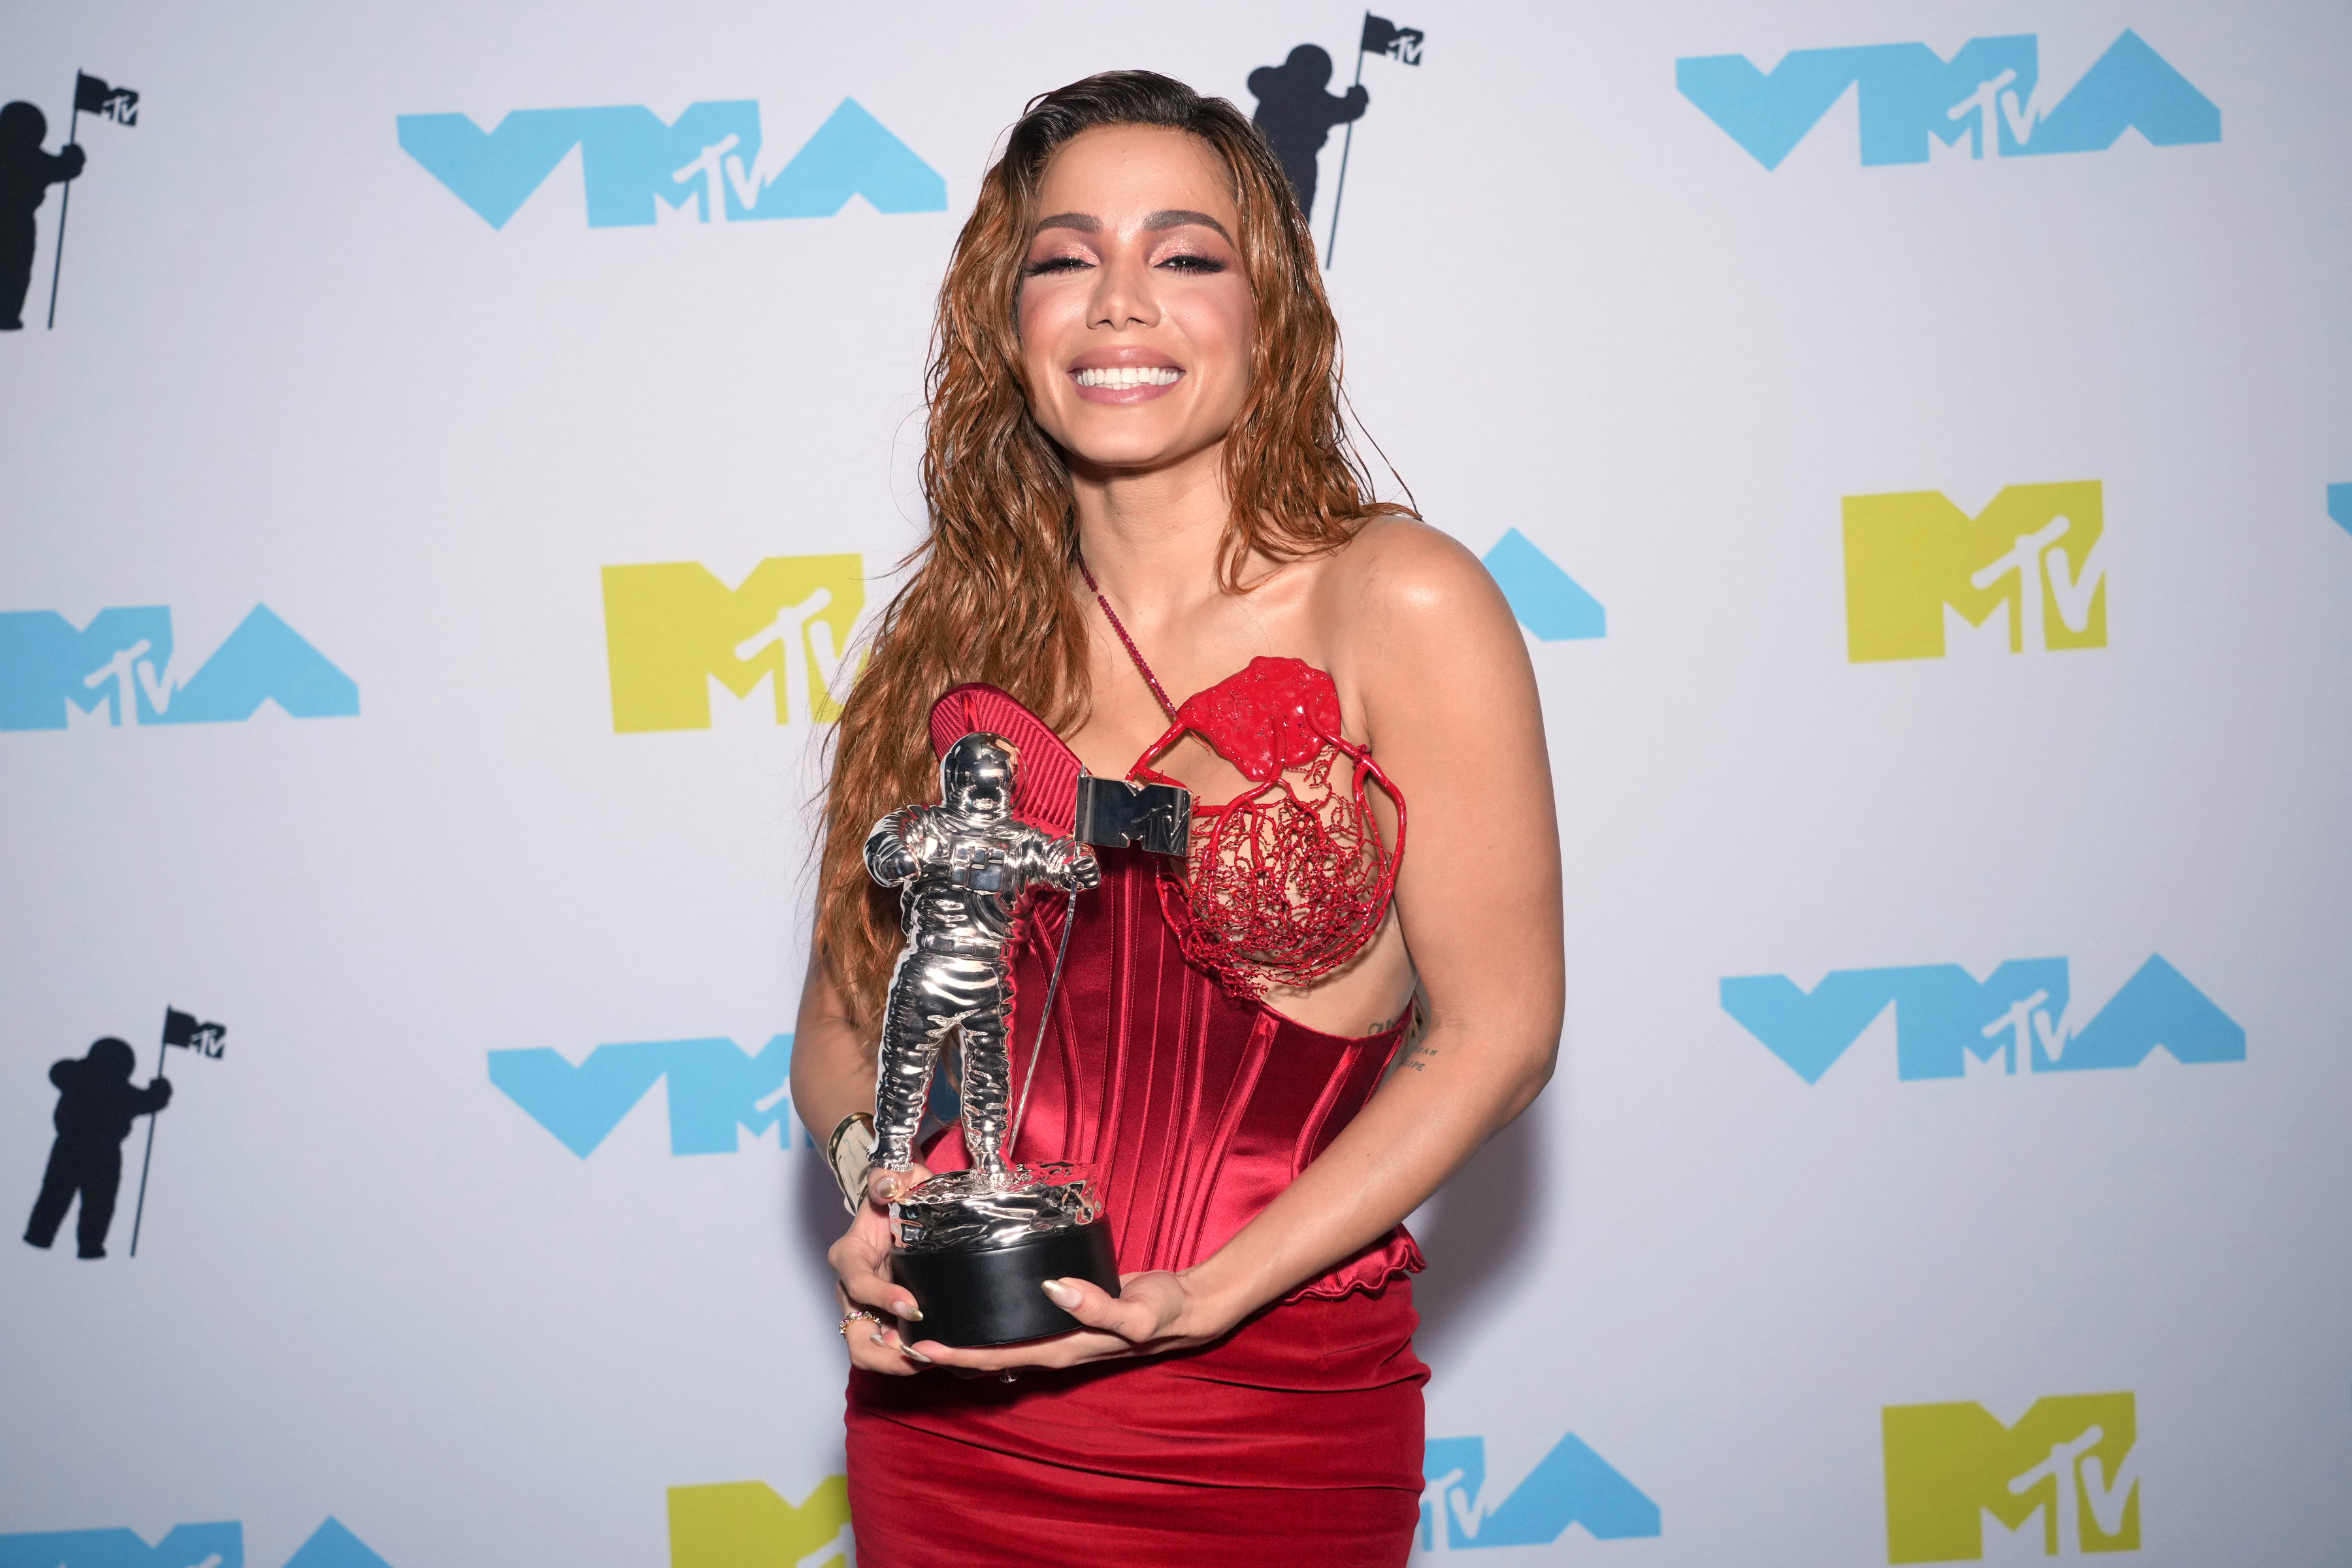 MTV's VMAs heading back to N.J. for first time since 2019